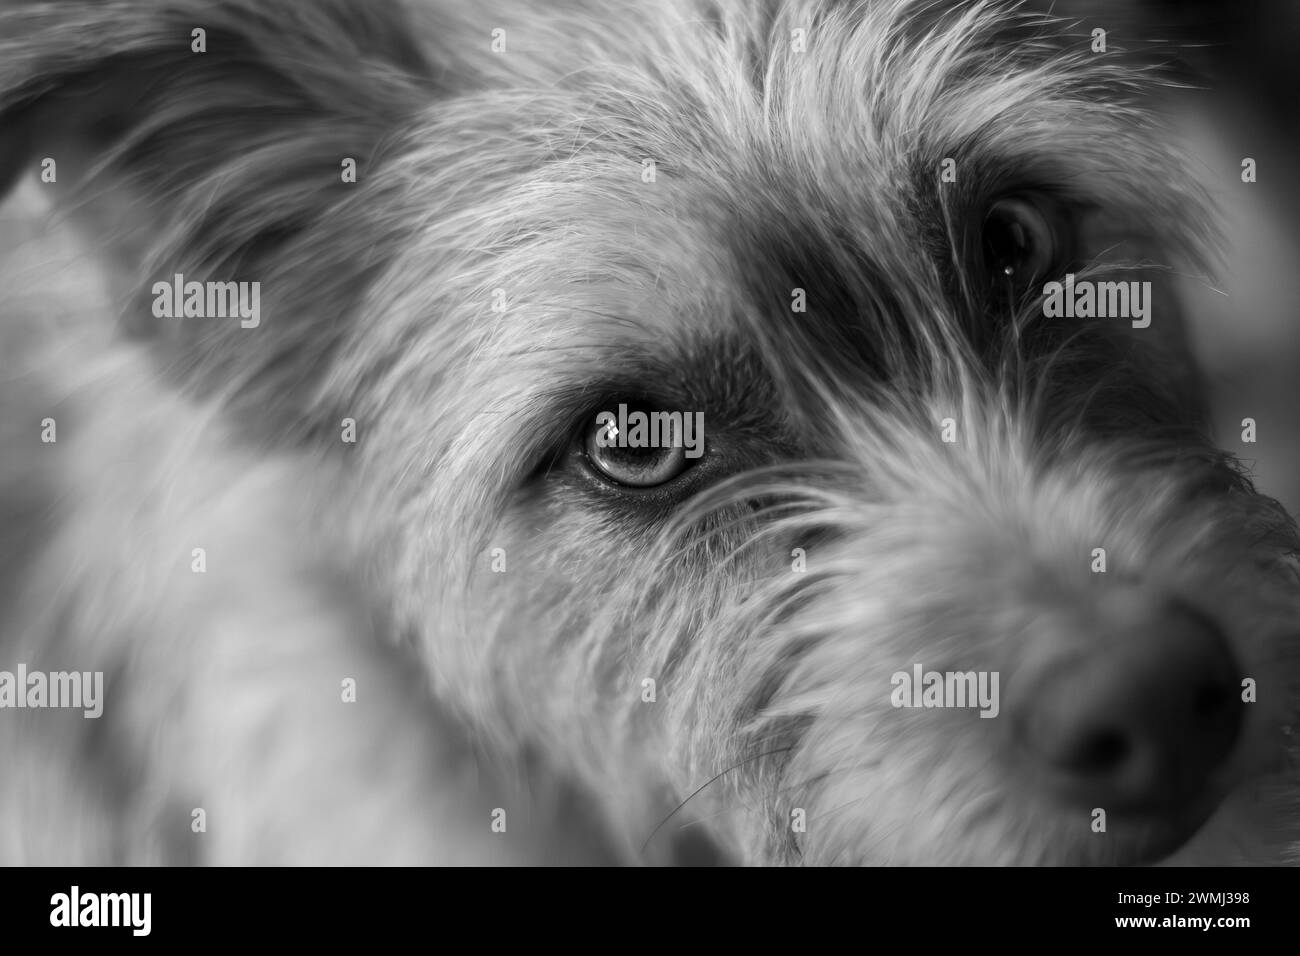 Black & white image of a terrier dog looking intently at the camera Stock Photo